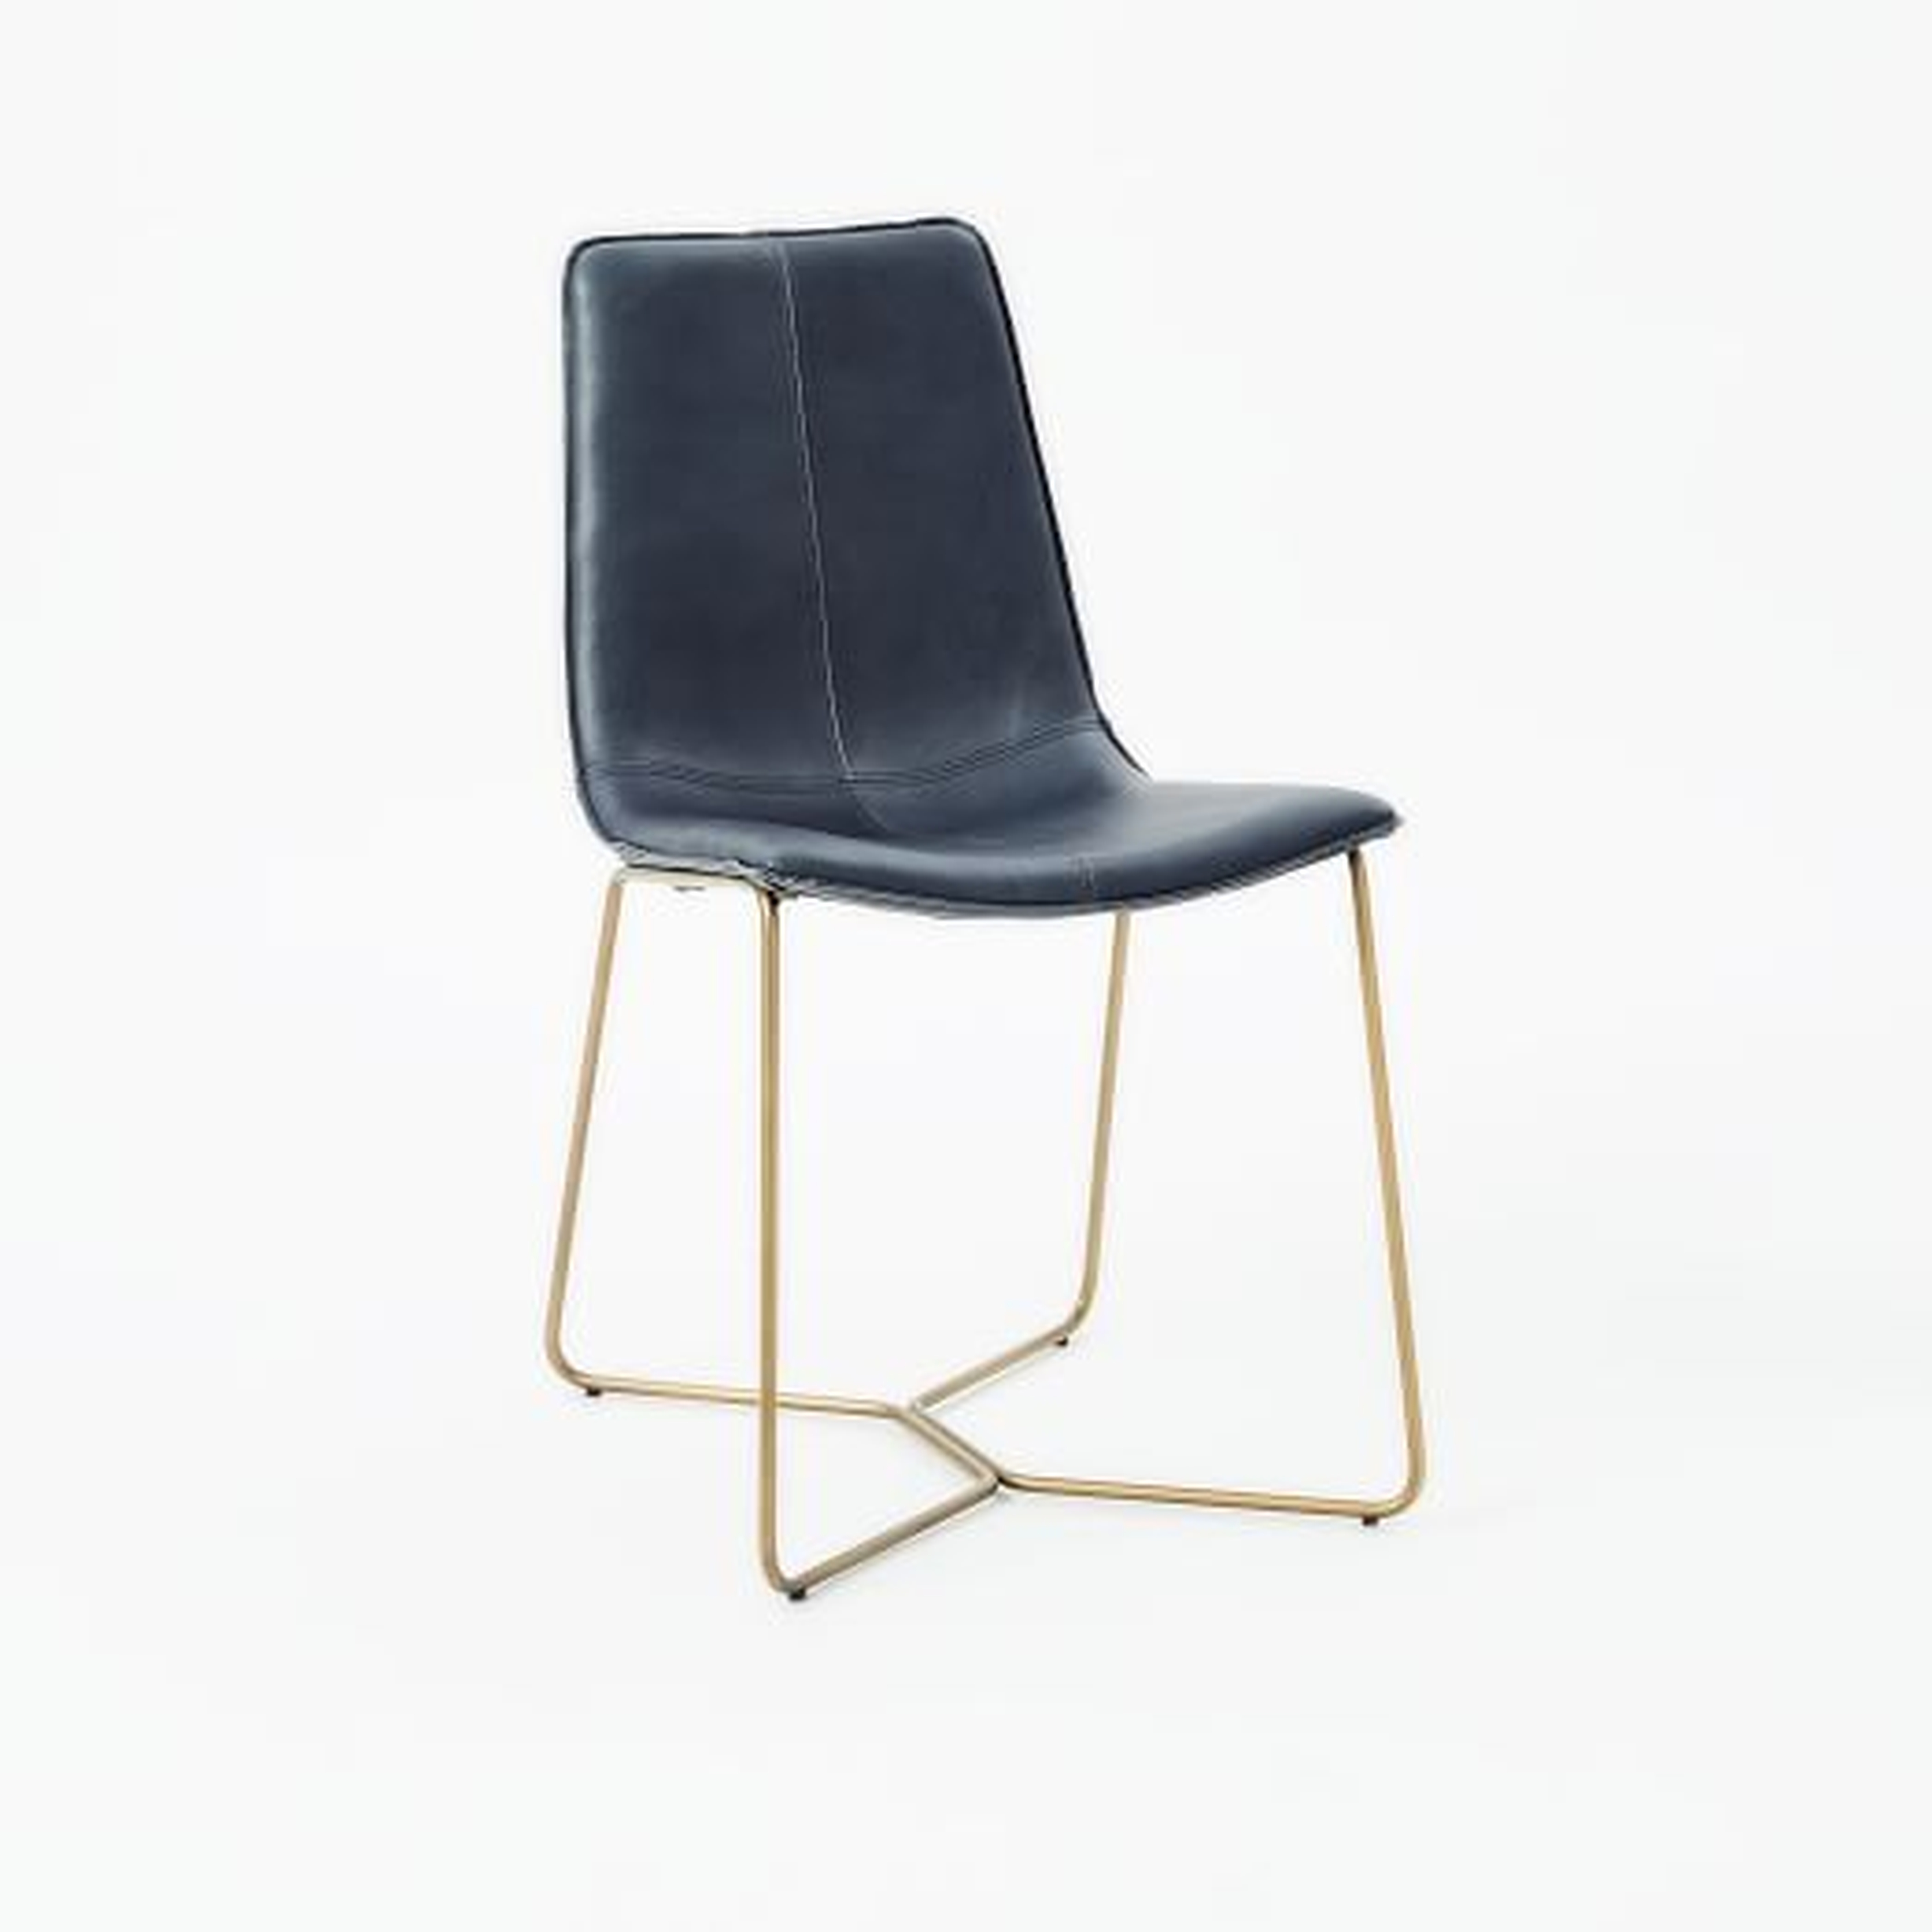 Leather Slope Dining Chair Aegean Blue - West Elm